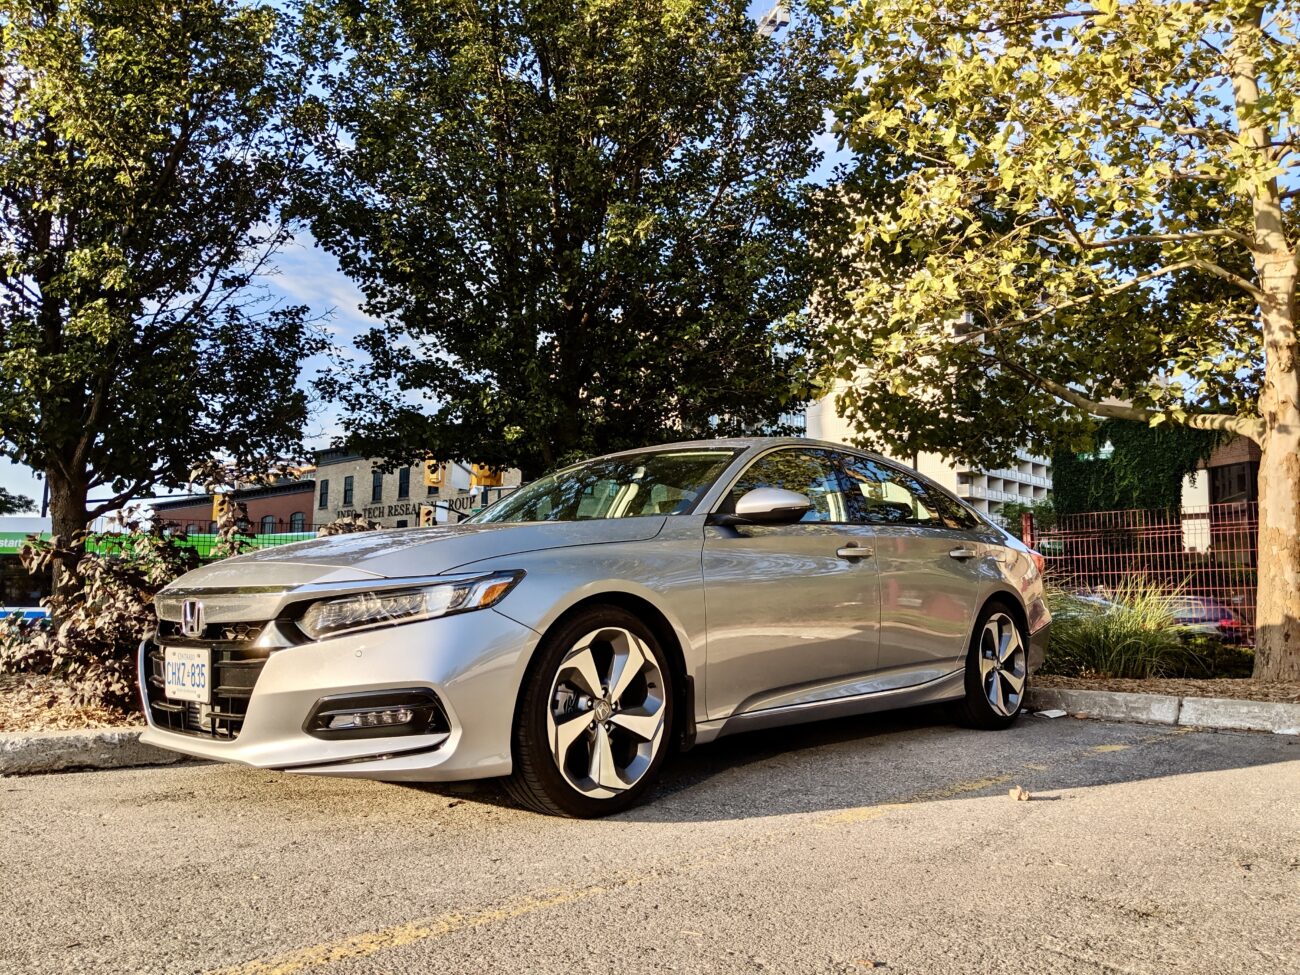 A silver Honda Accord in a parking lot surrounded by trees